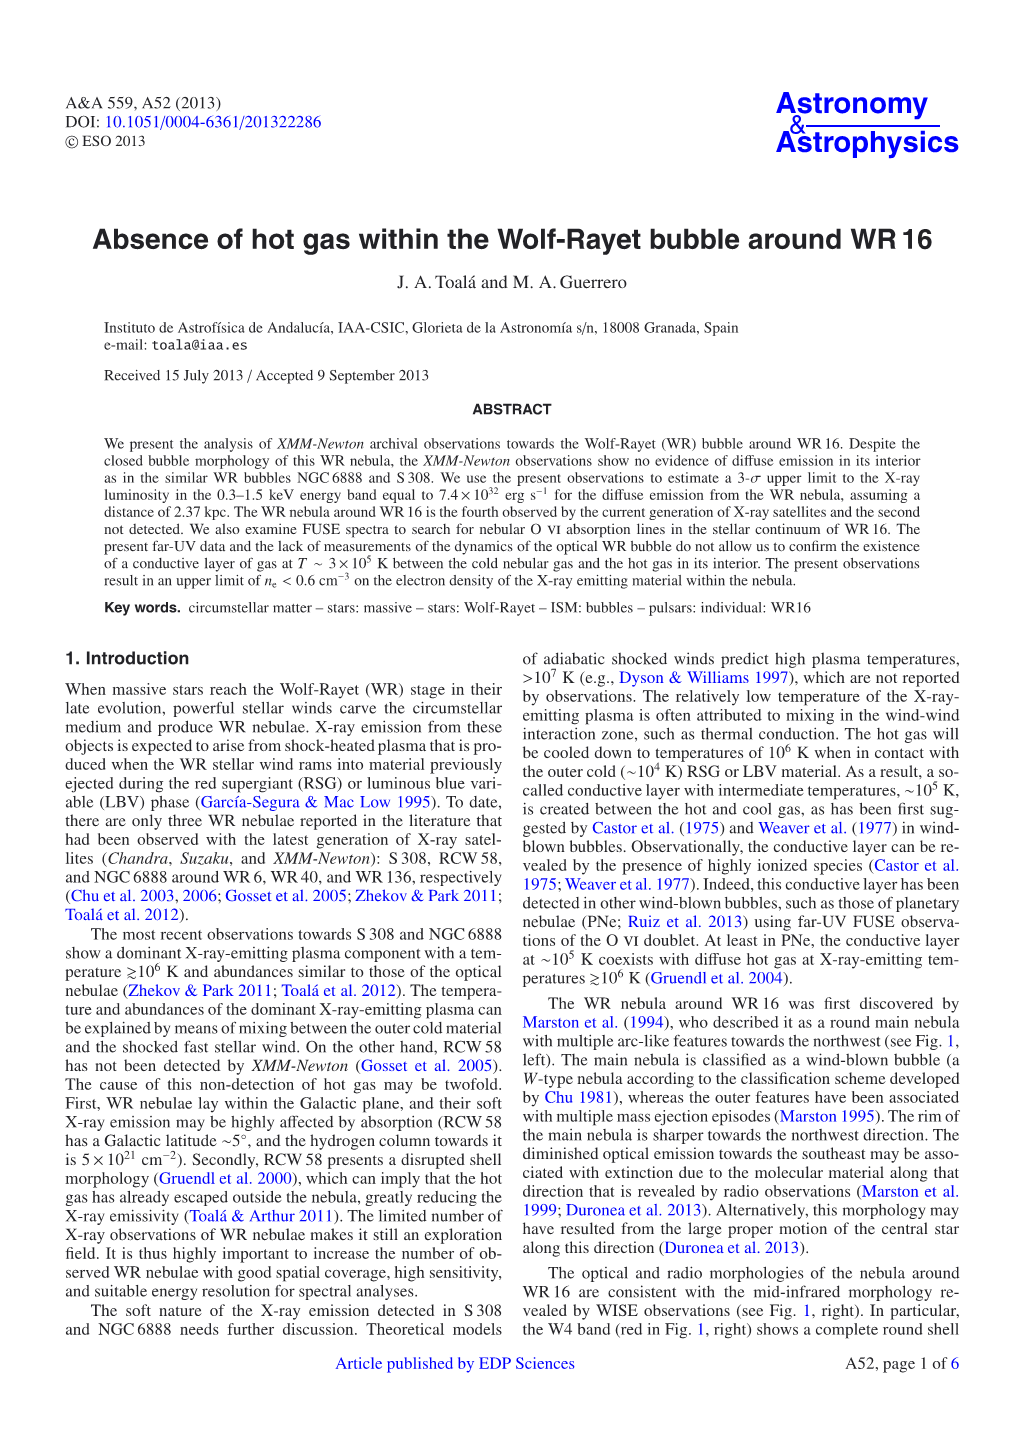 Absence of Hot Gas Within the Wolf-Rayet Bubble Around WR 16